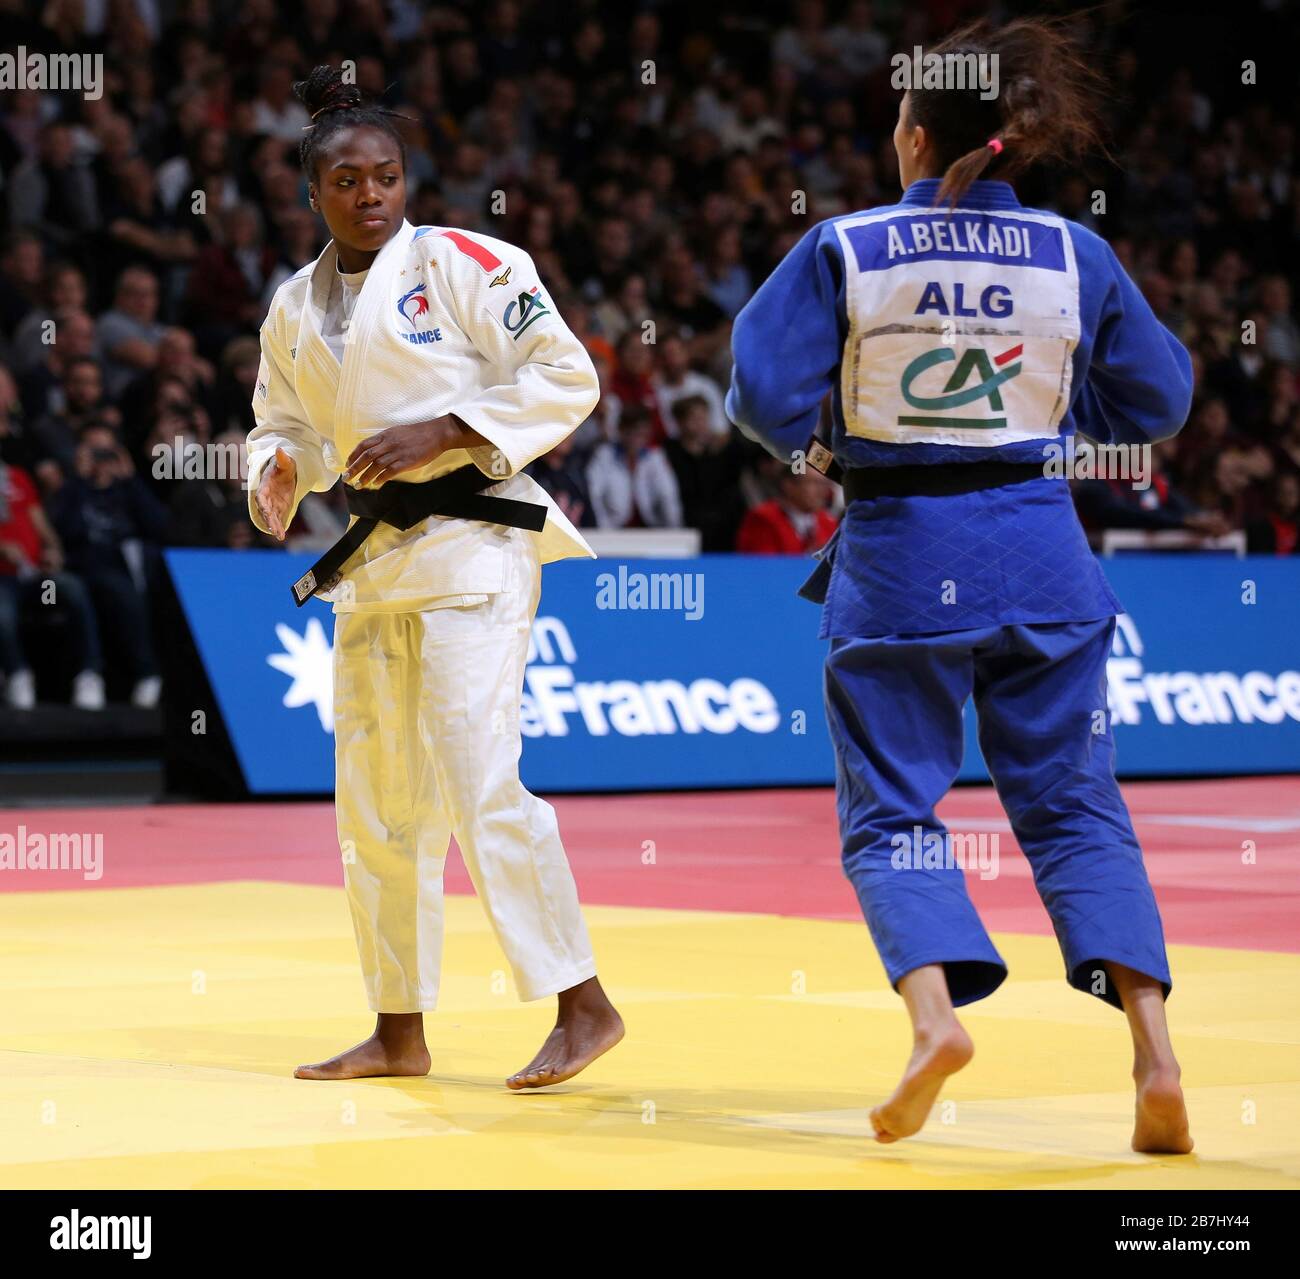 Paris, France - 08th Feb, 2020: Clarisse Agbegnenou for France against Amina Belkadi for Algeria, Women's -63 kg, Round two (Credit: Mickael Chavet) Stock Photo